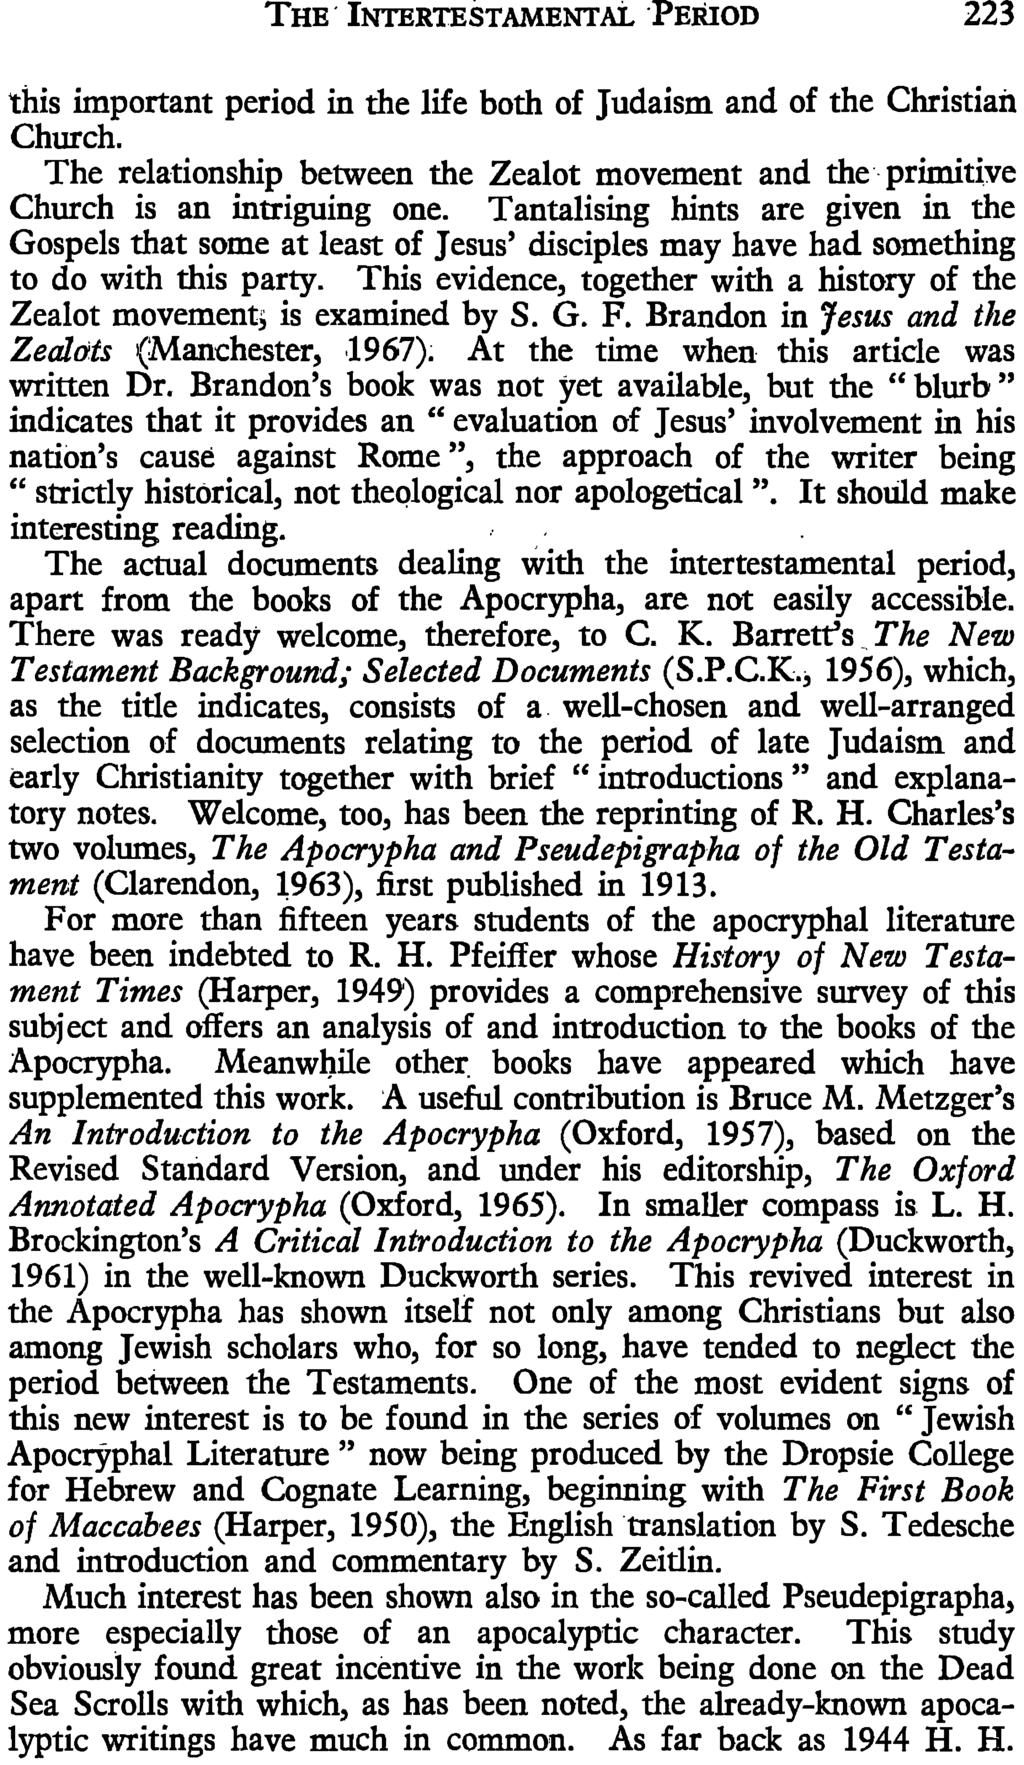 THE' INTERTESTAMENTAi 'PERIOD 223 this important period in the life both of Judaism and of the Christian Church.